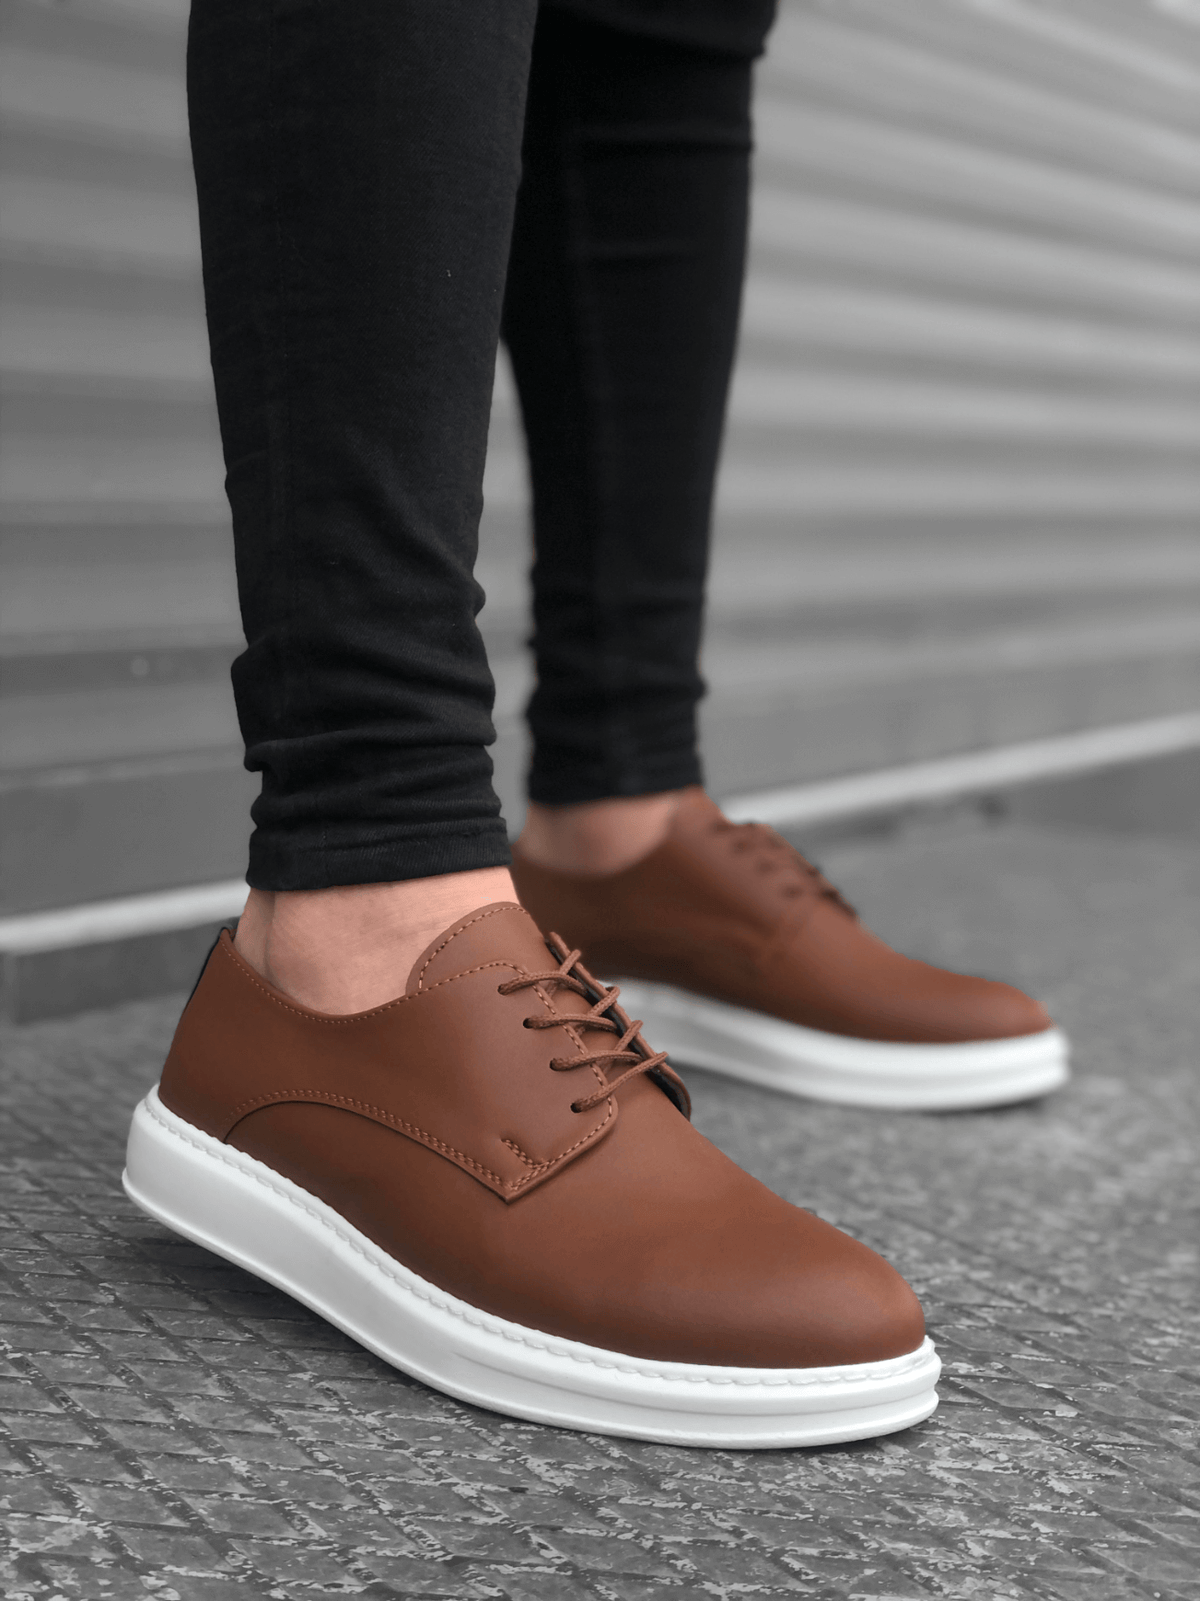 BA0003 Lace-Up Classic Tan White Thick Sole Casual Men's Shoes - STREETMODE ™